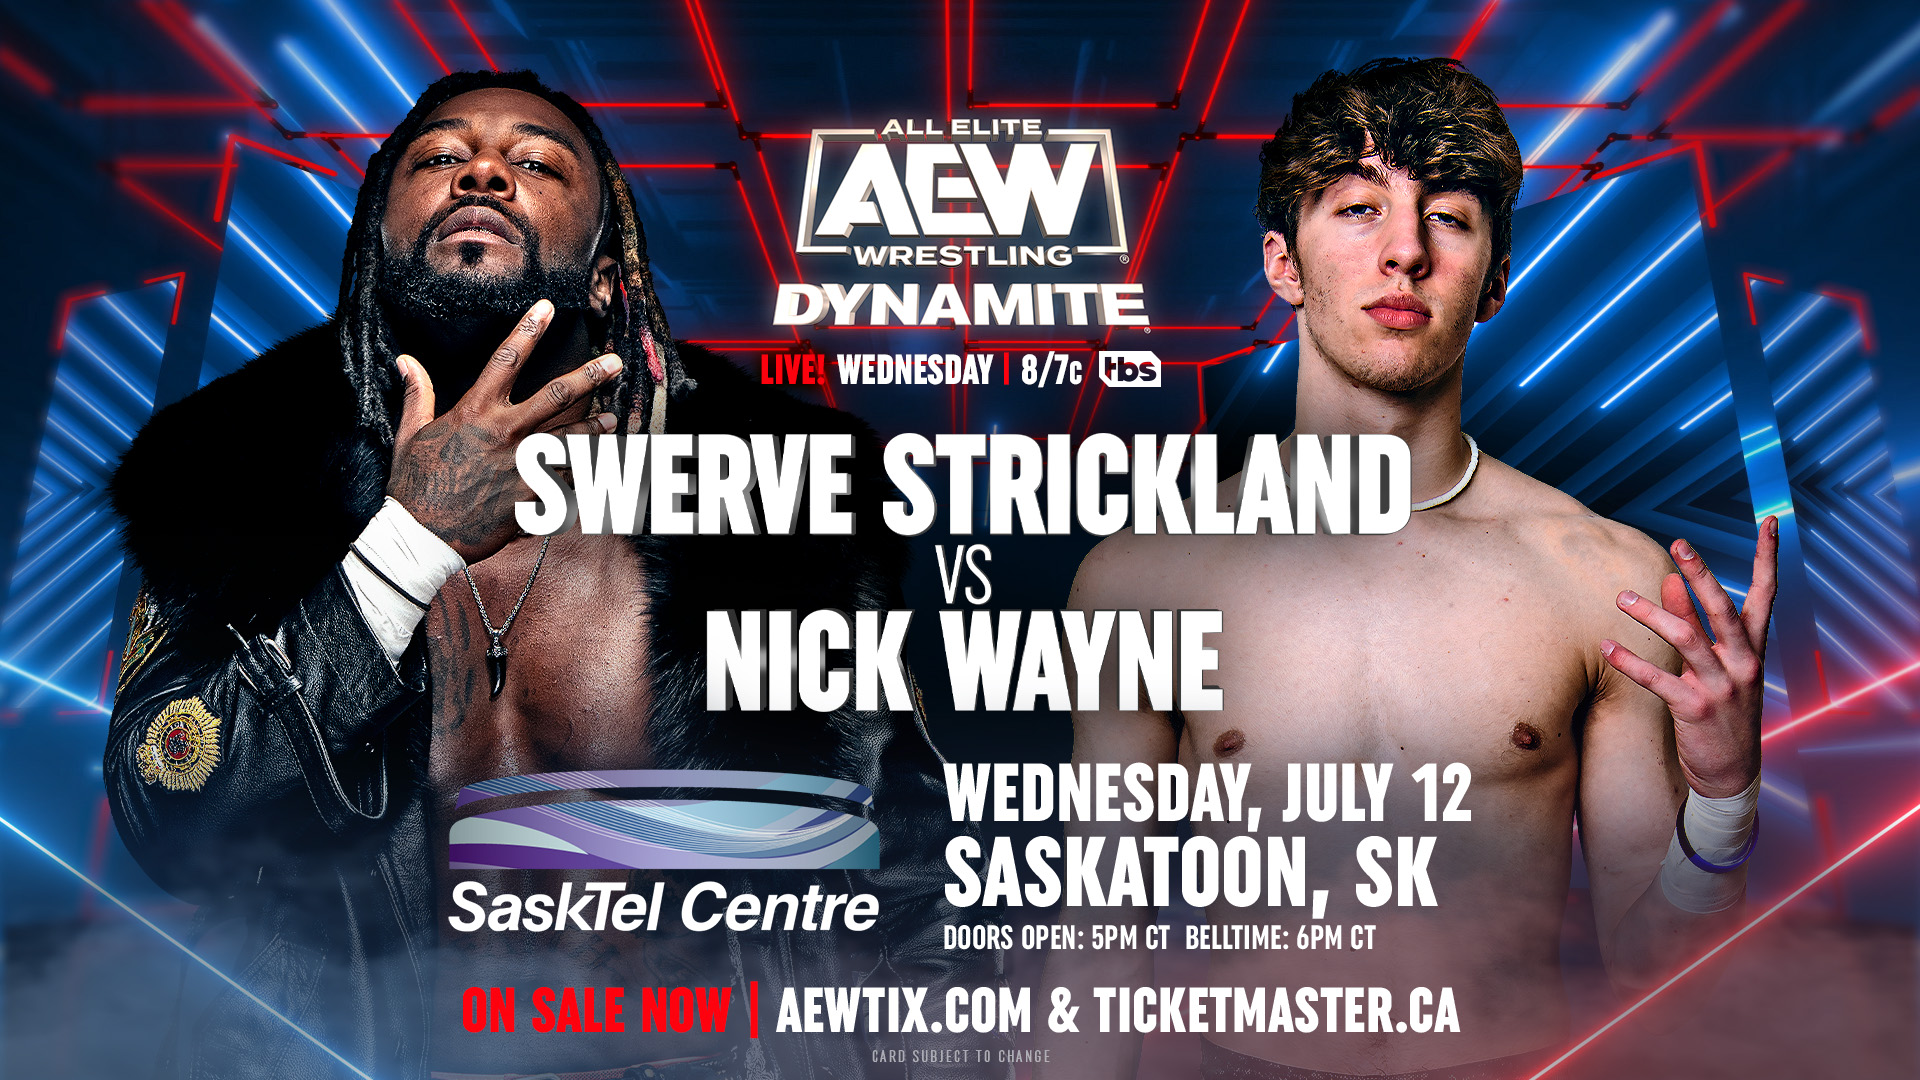 A graphic hyping up Nick Wayne's AEW debut on AEW Dynamite.